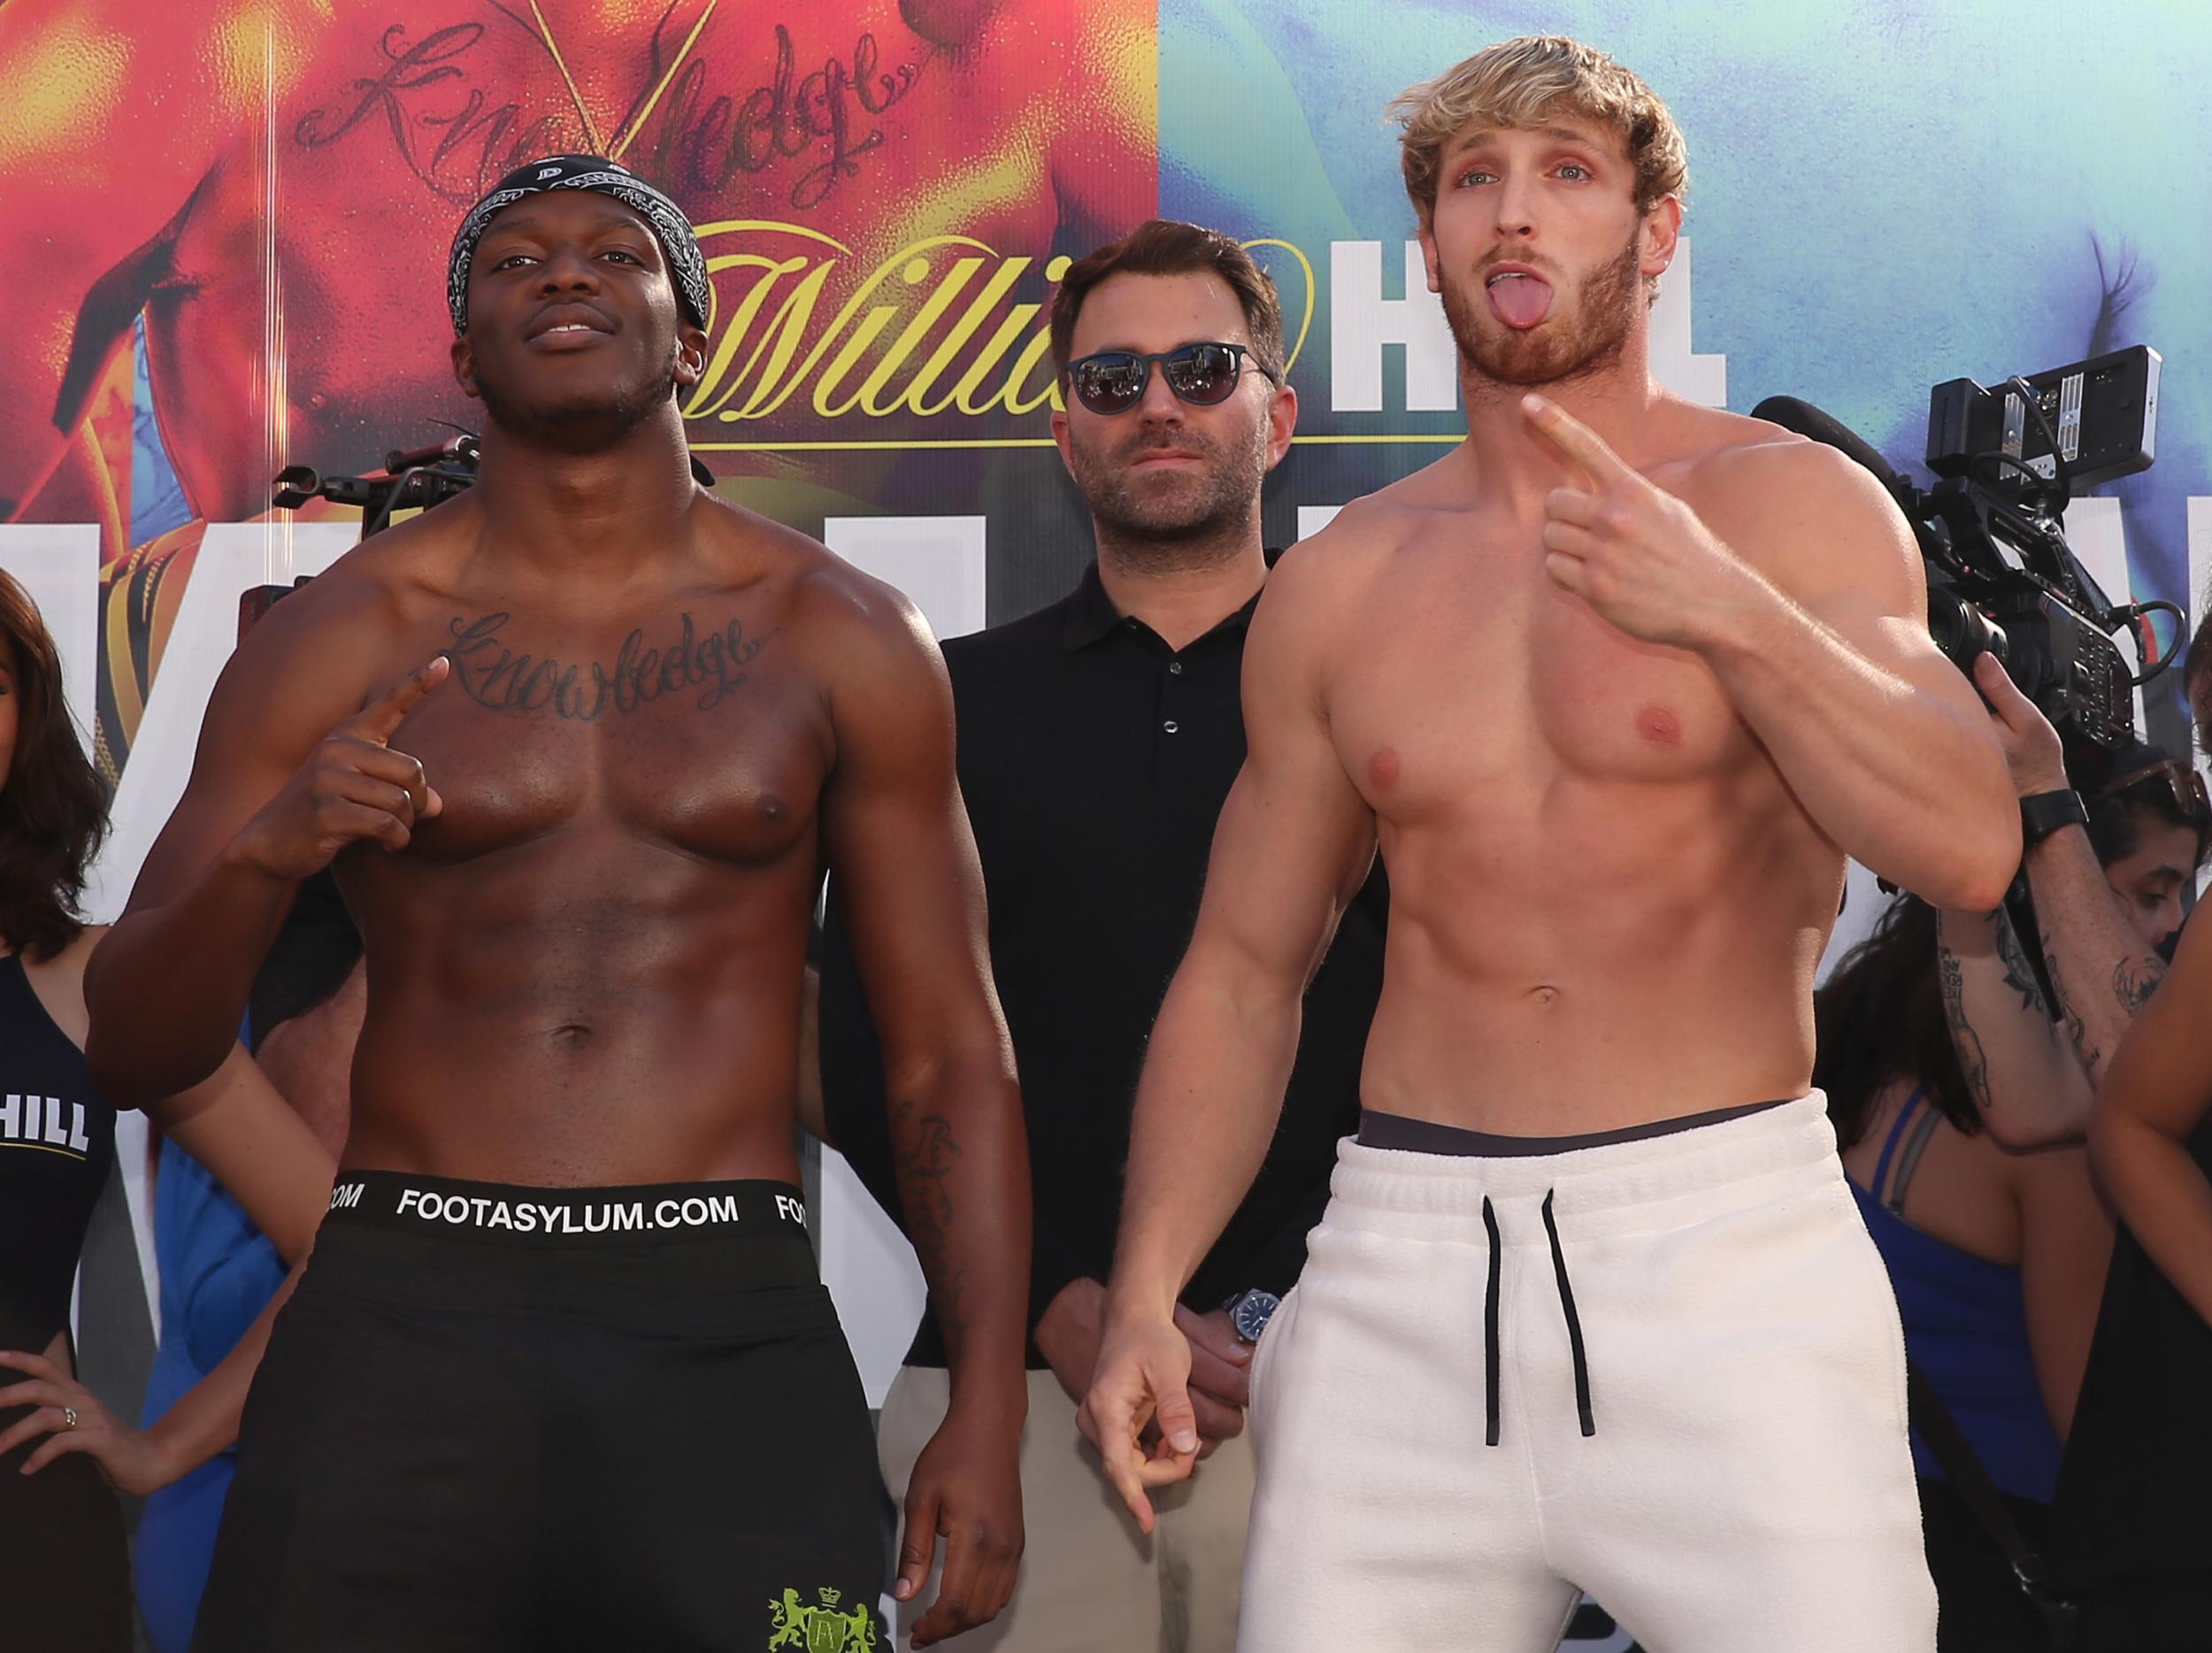 KSI vs Logan Paul: Watch full fight replay ahead of rematch in Los Angeles